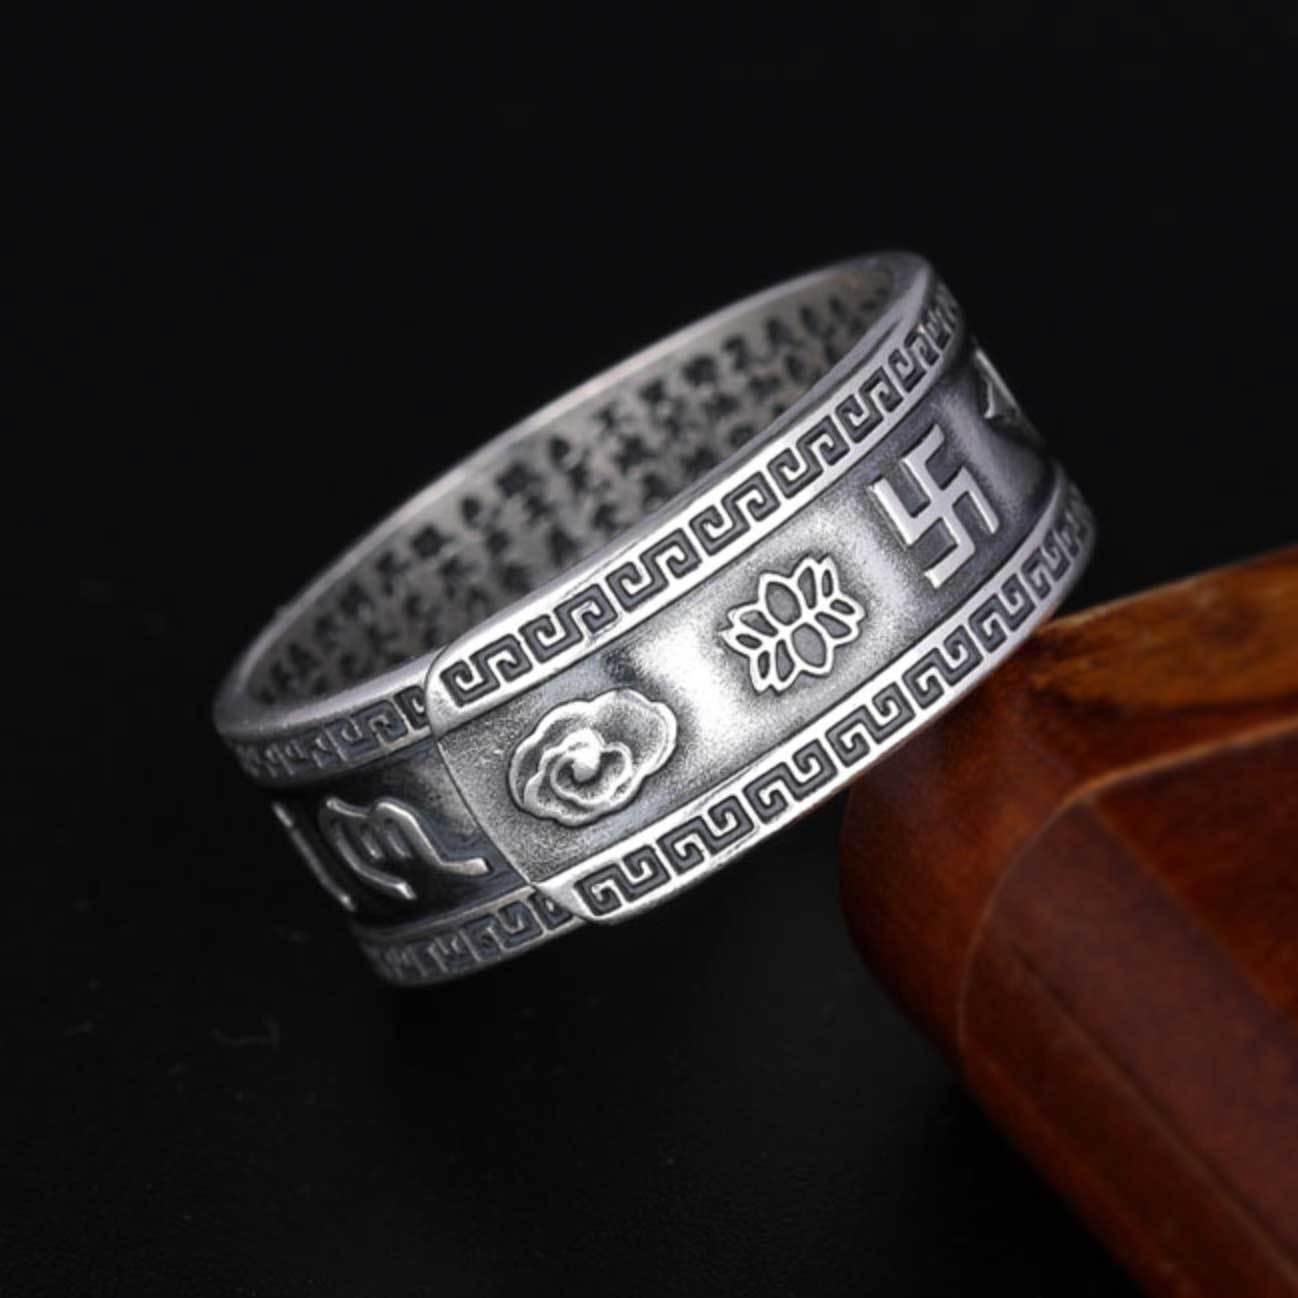 Mantra Engraved Pixiu Feng Shui Ring for Wealth and Protection - Ring - Inner Wisdom Store